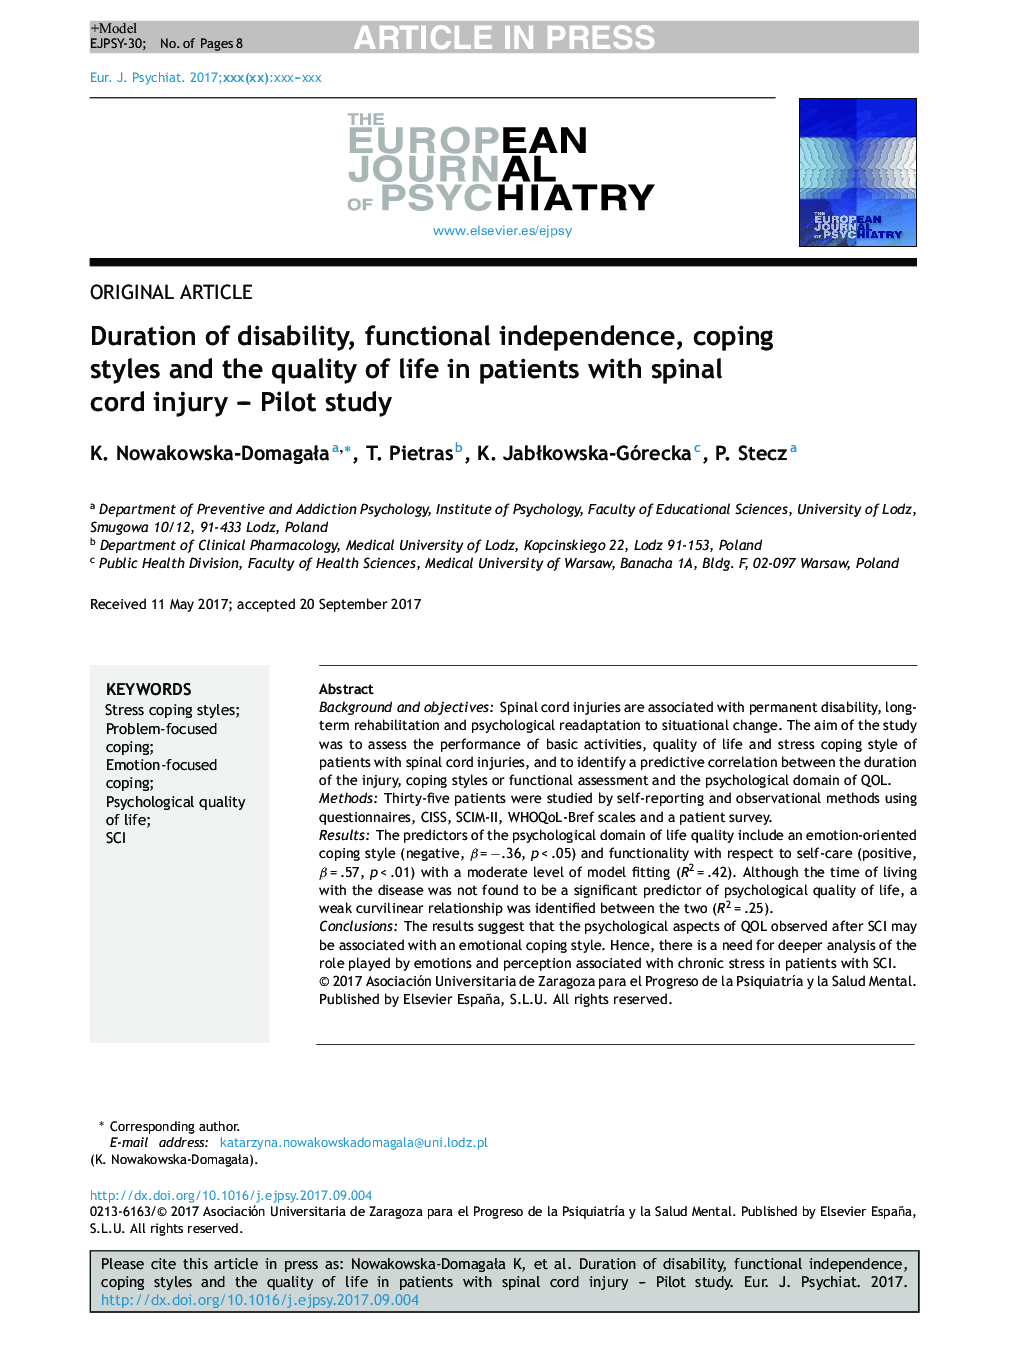 Duration of disability, functional independence, coping styles and the quality of life in patients with spinal cord injury - Pilot study